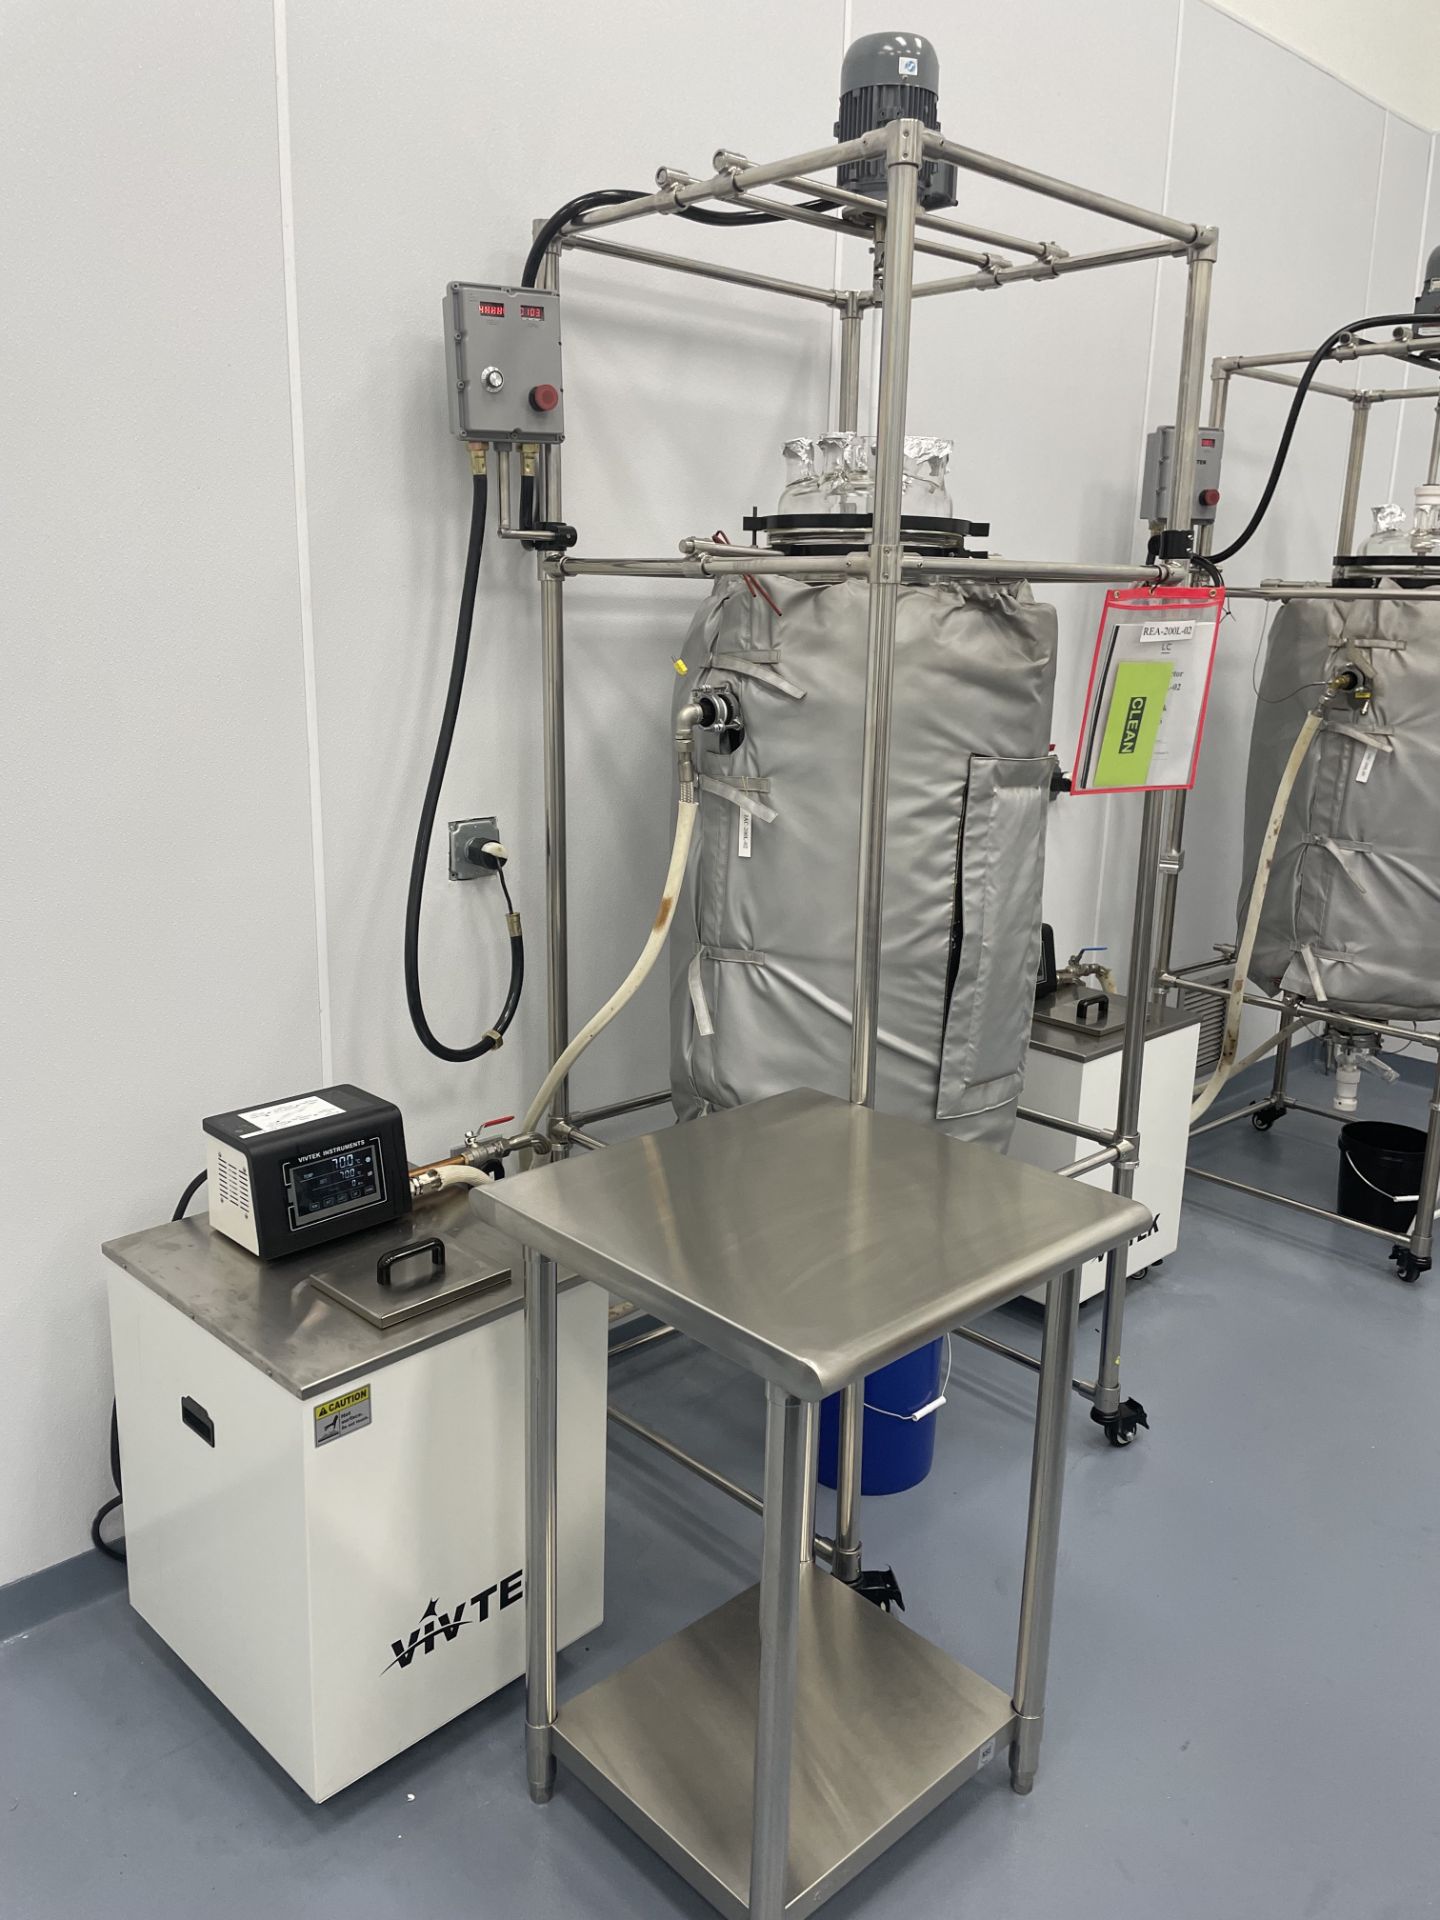 Used 200 L Agitated Jacketed Glass Reactor with Vivtek Chilling/ Heating Unit.